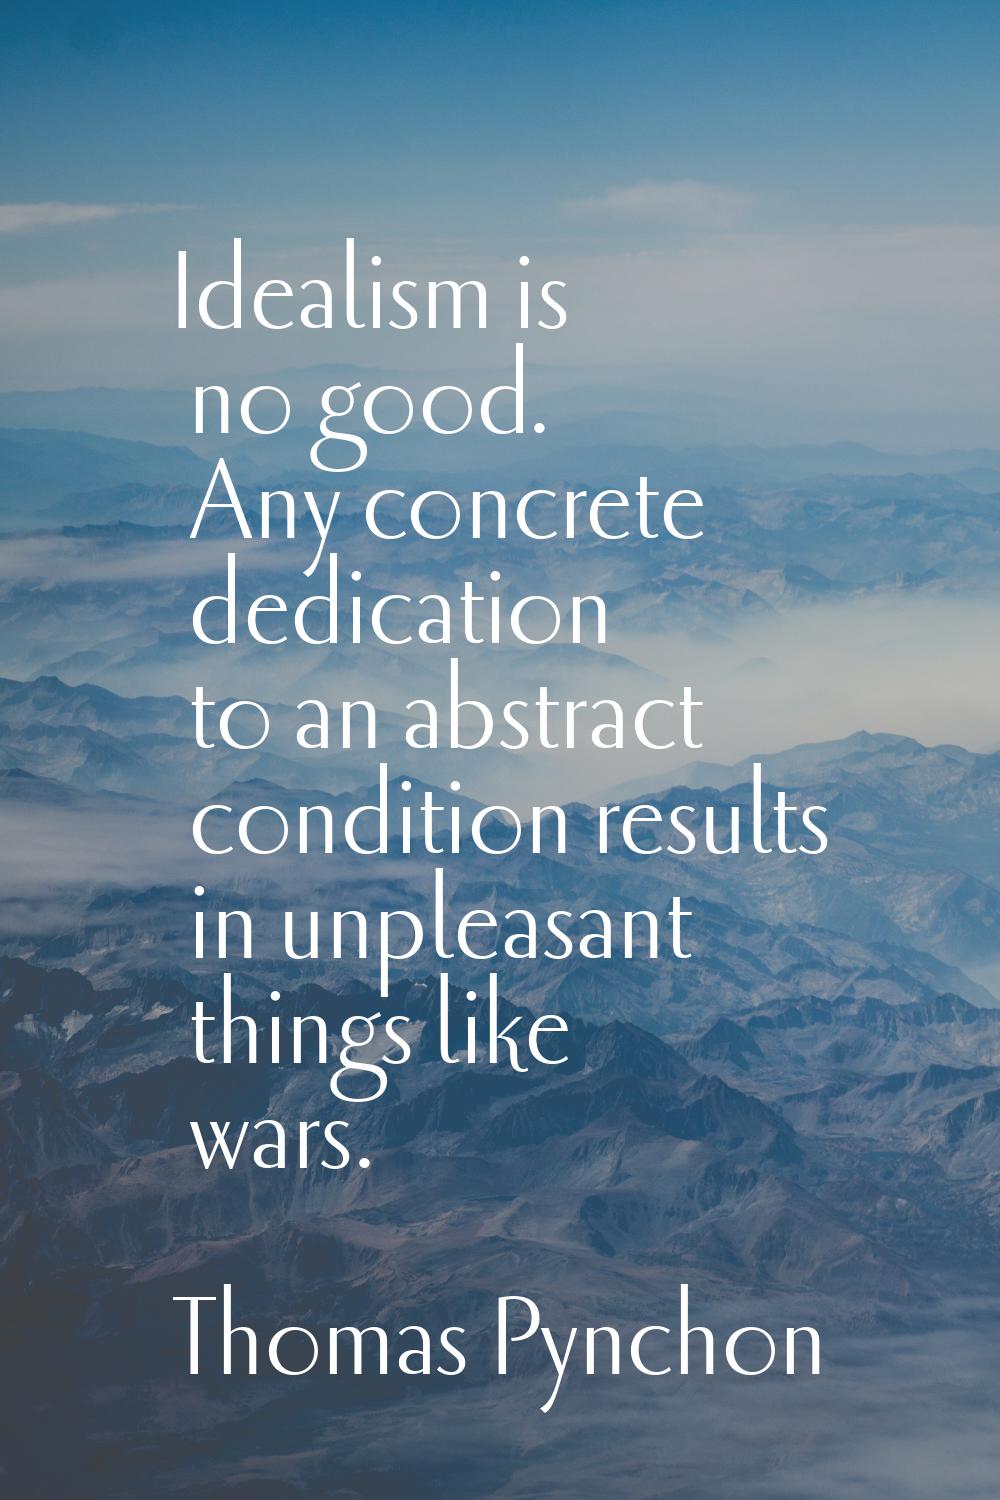 Idealism is no good. Any concrete dedication to an abstract condition results in unpleasant things 